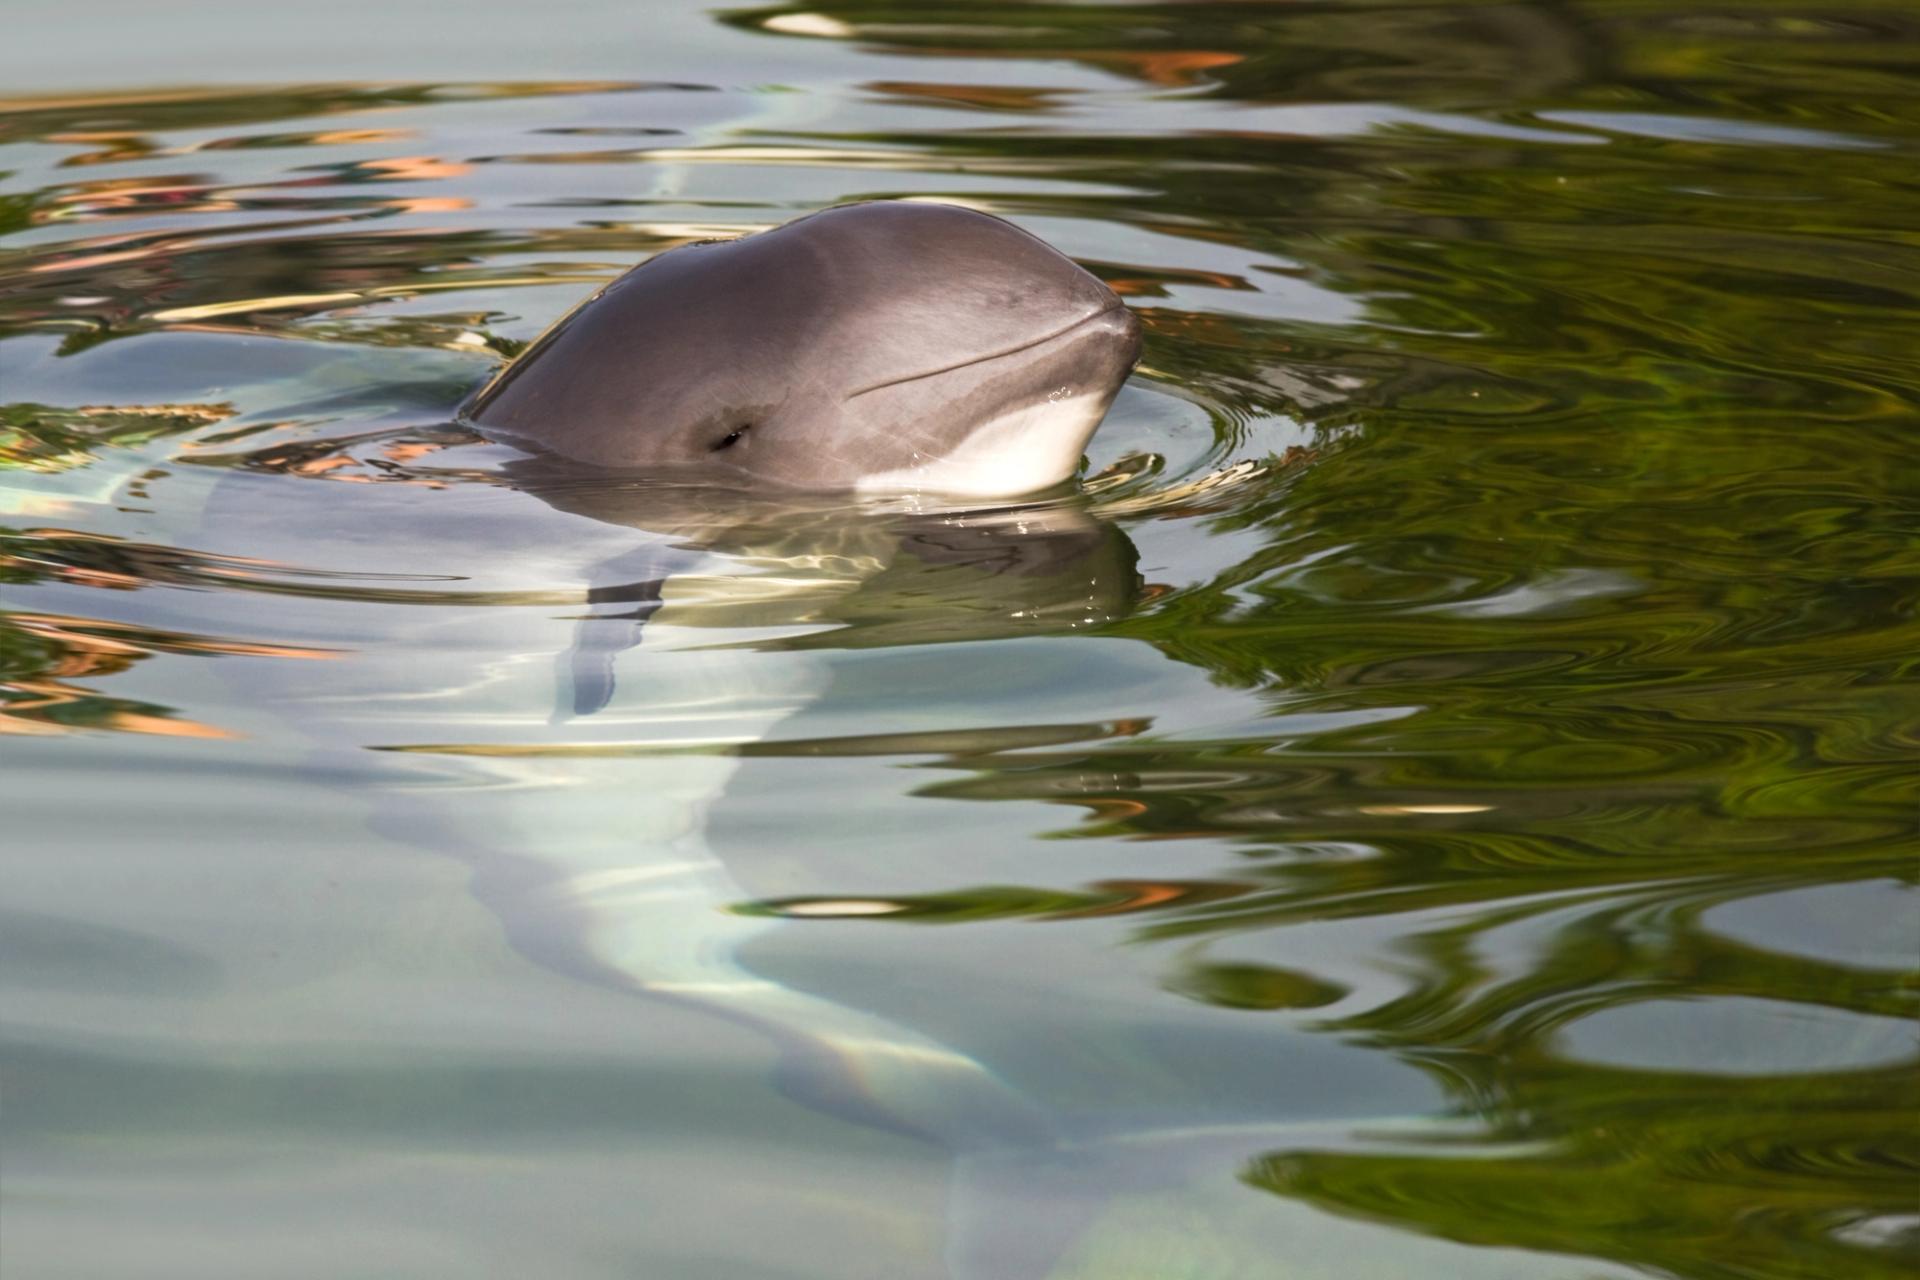 A Common Porpoise is in the ocean, his head out of the water